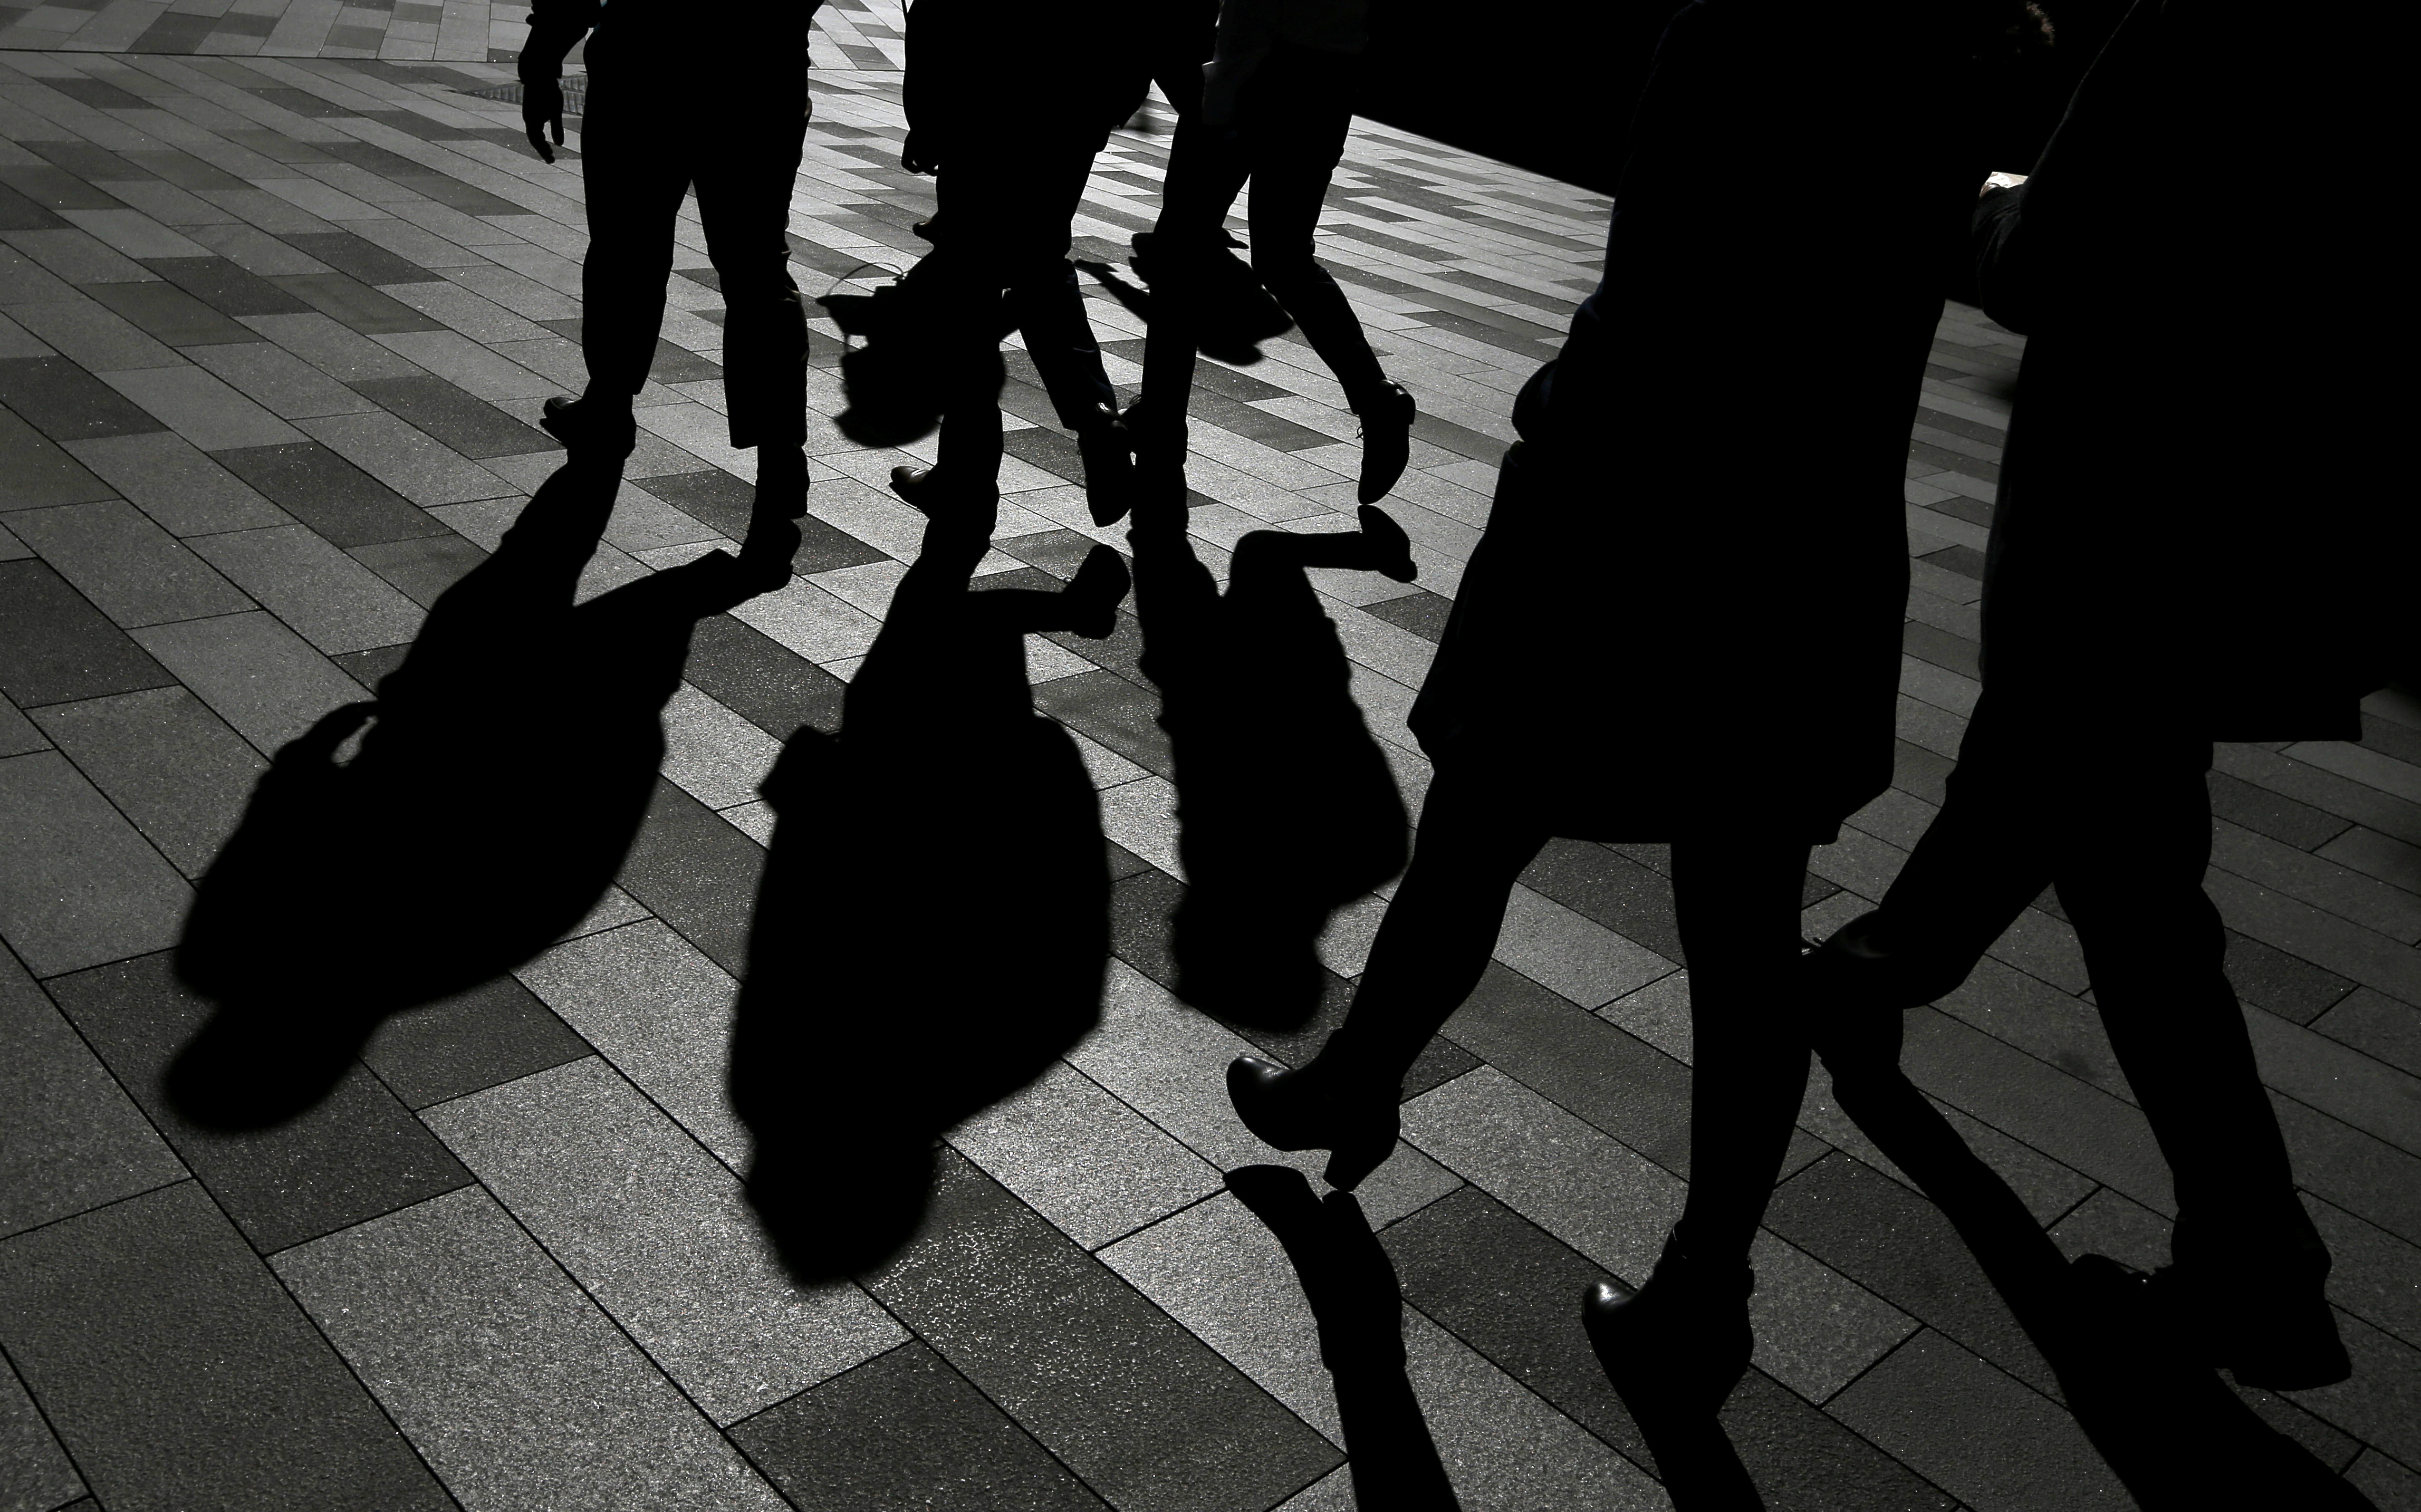 Workers cast shadows as they stroll among the office towers Sydney's Barangaroo business district in Australia's largest city